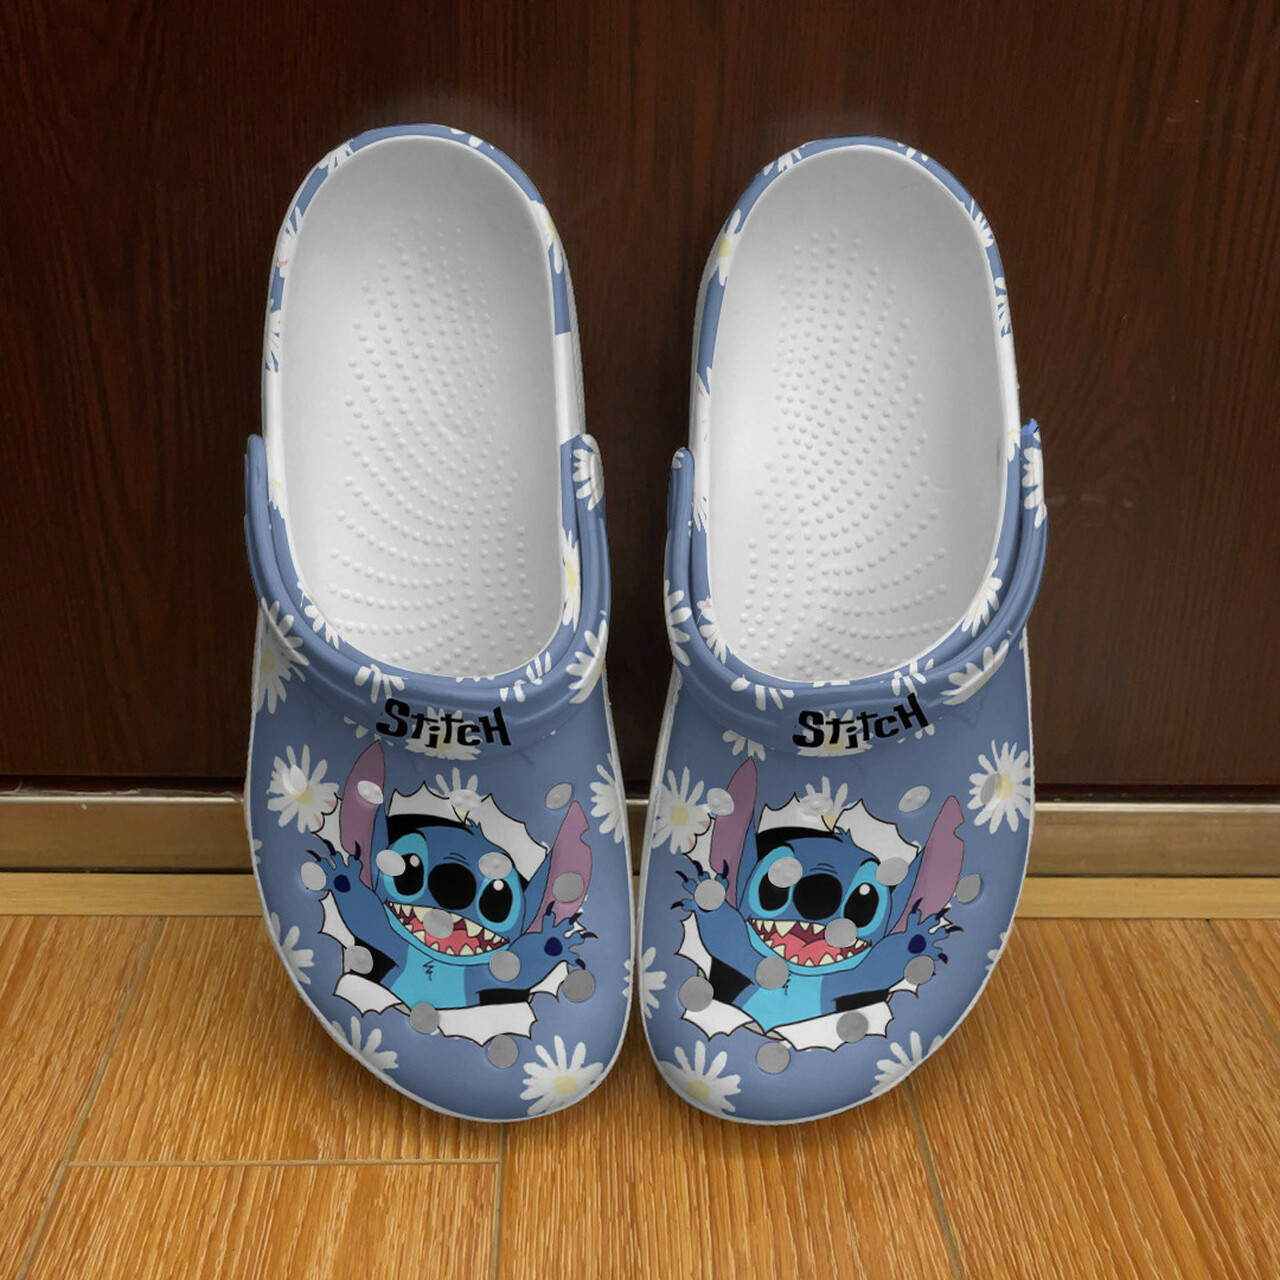 Lilo And Stitch Fan Gift Crocs Crocband Clog Comfortable Water Shoes ...